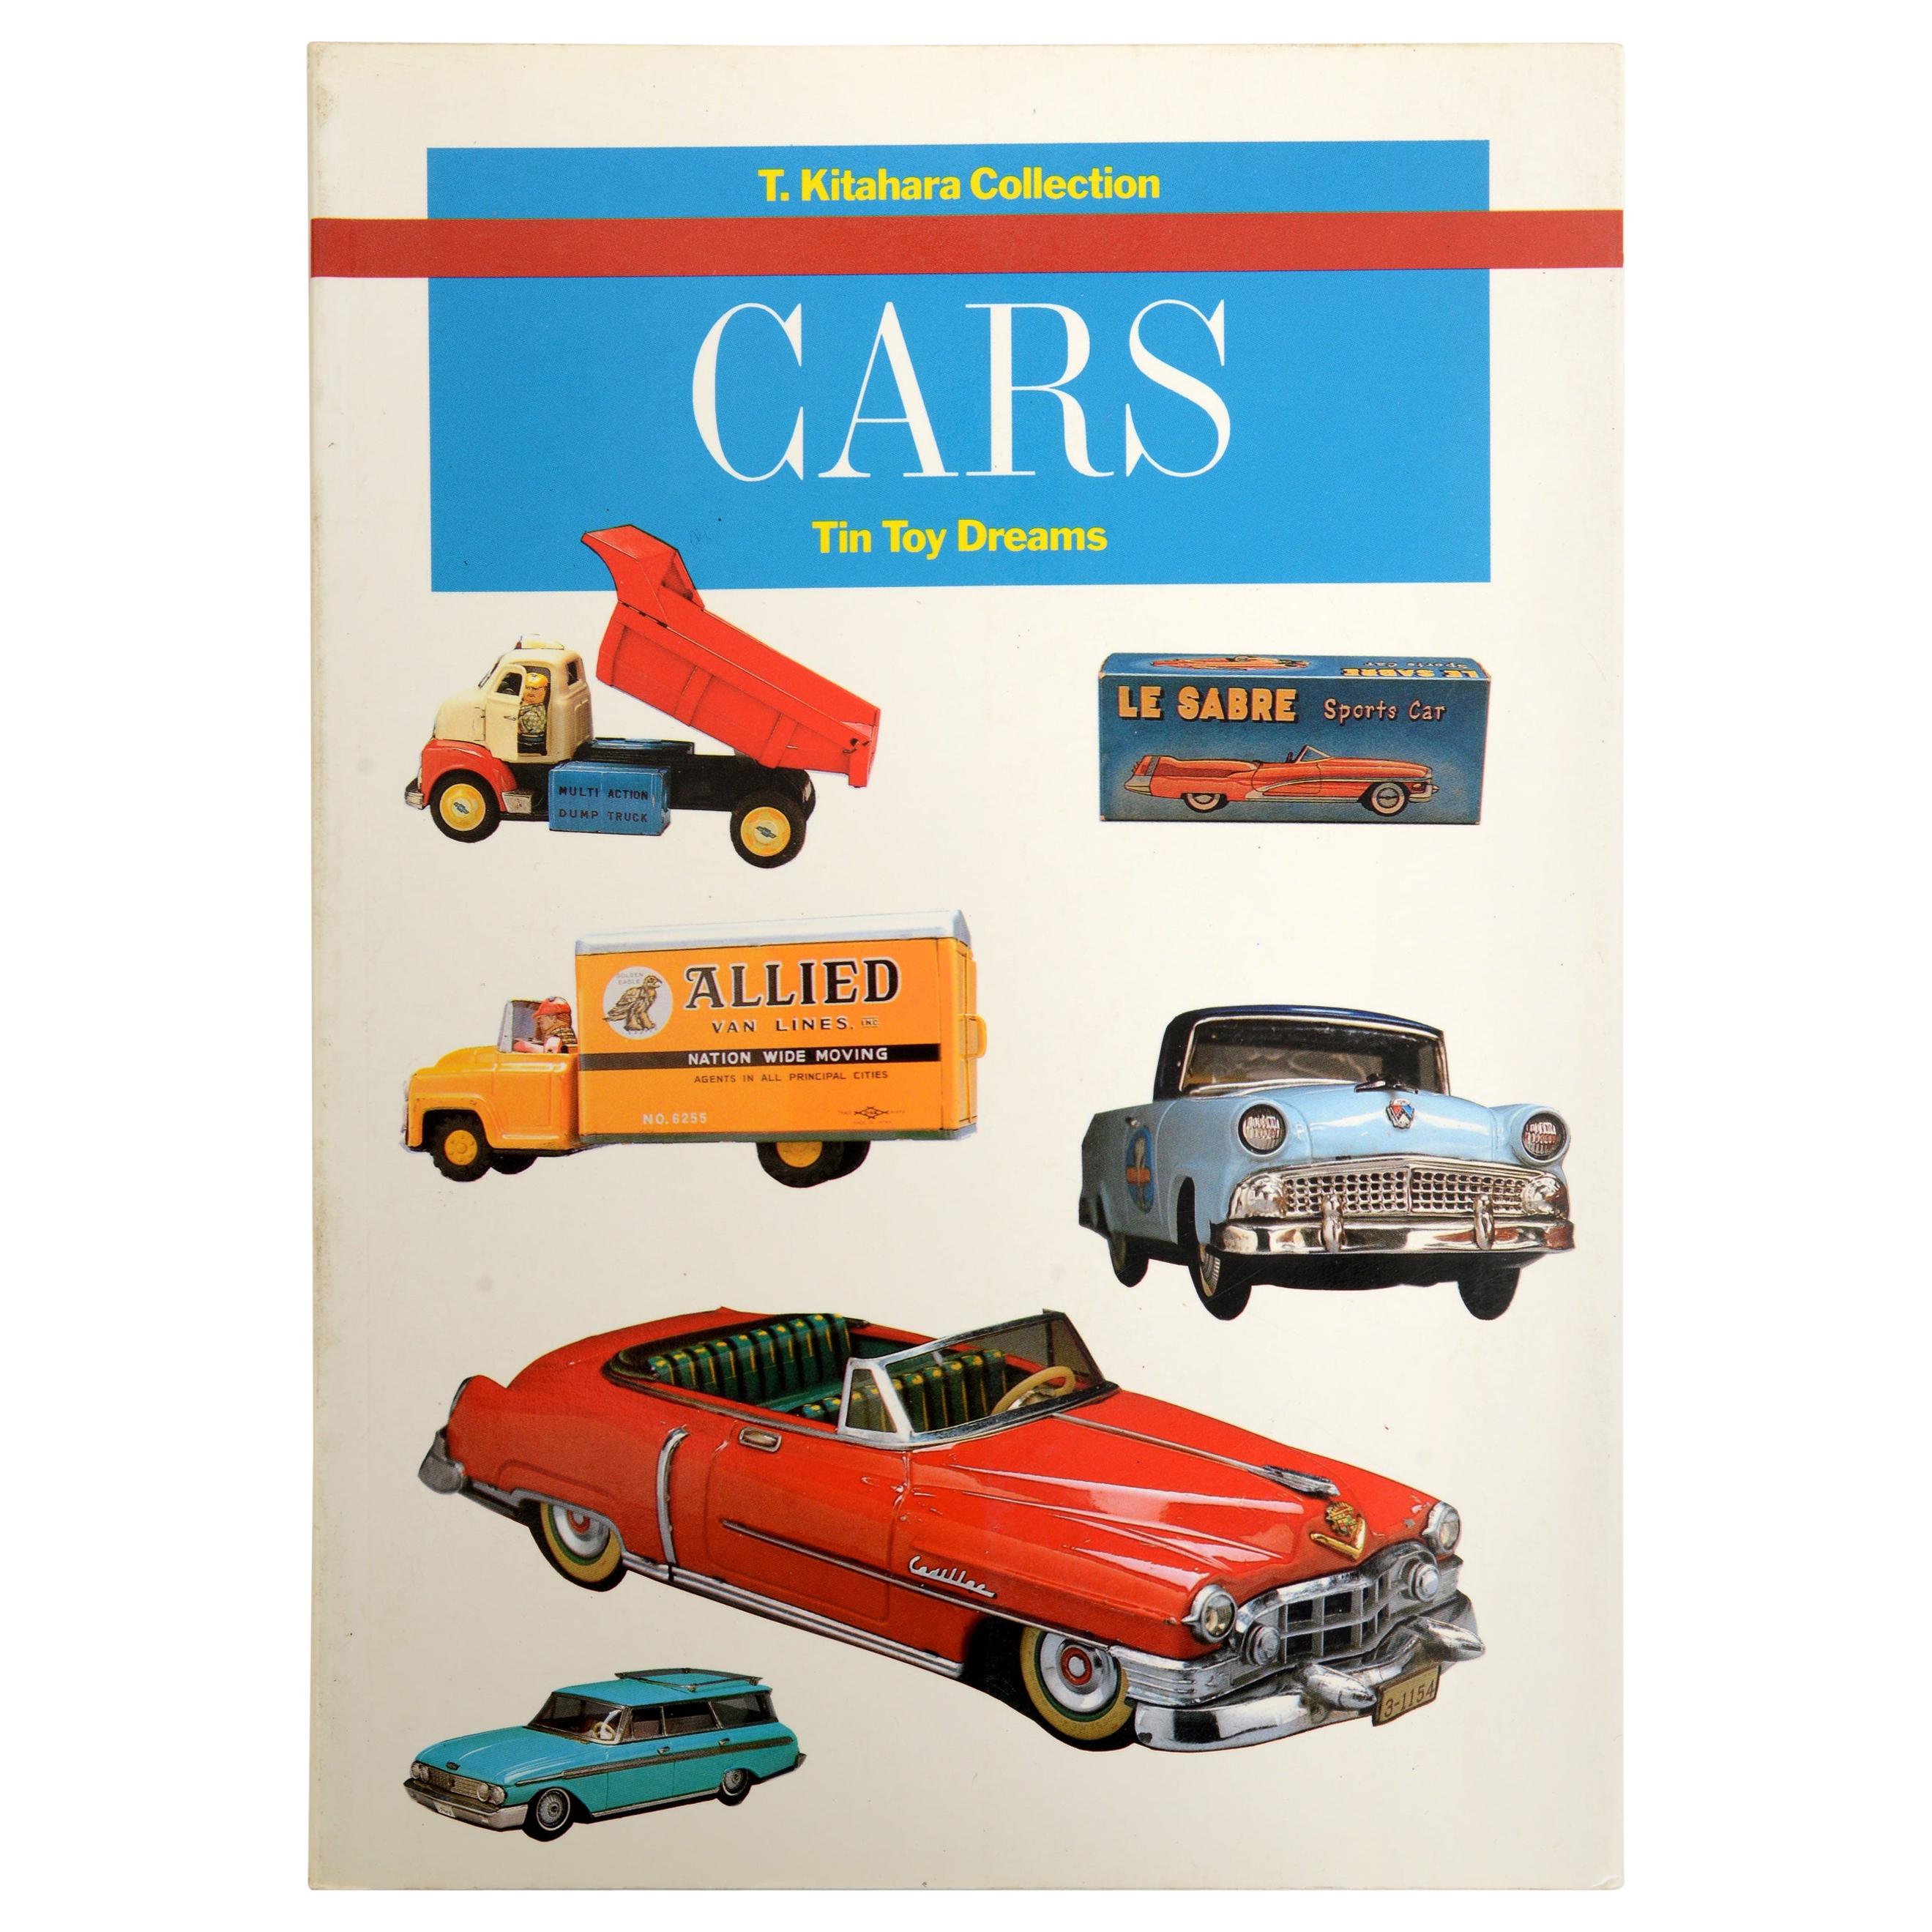 Cars Tin Toy Dreams by Teruhisa Kitahara, First Edition For Sale